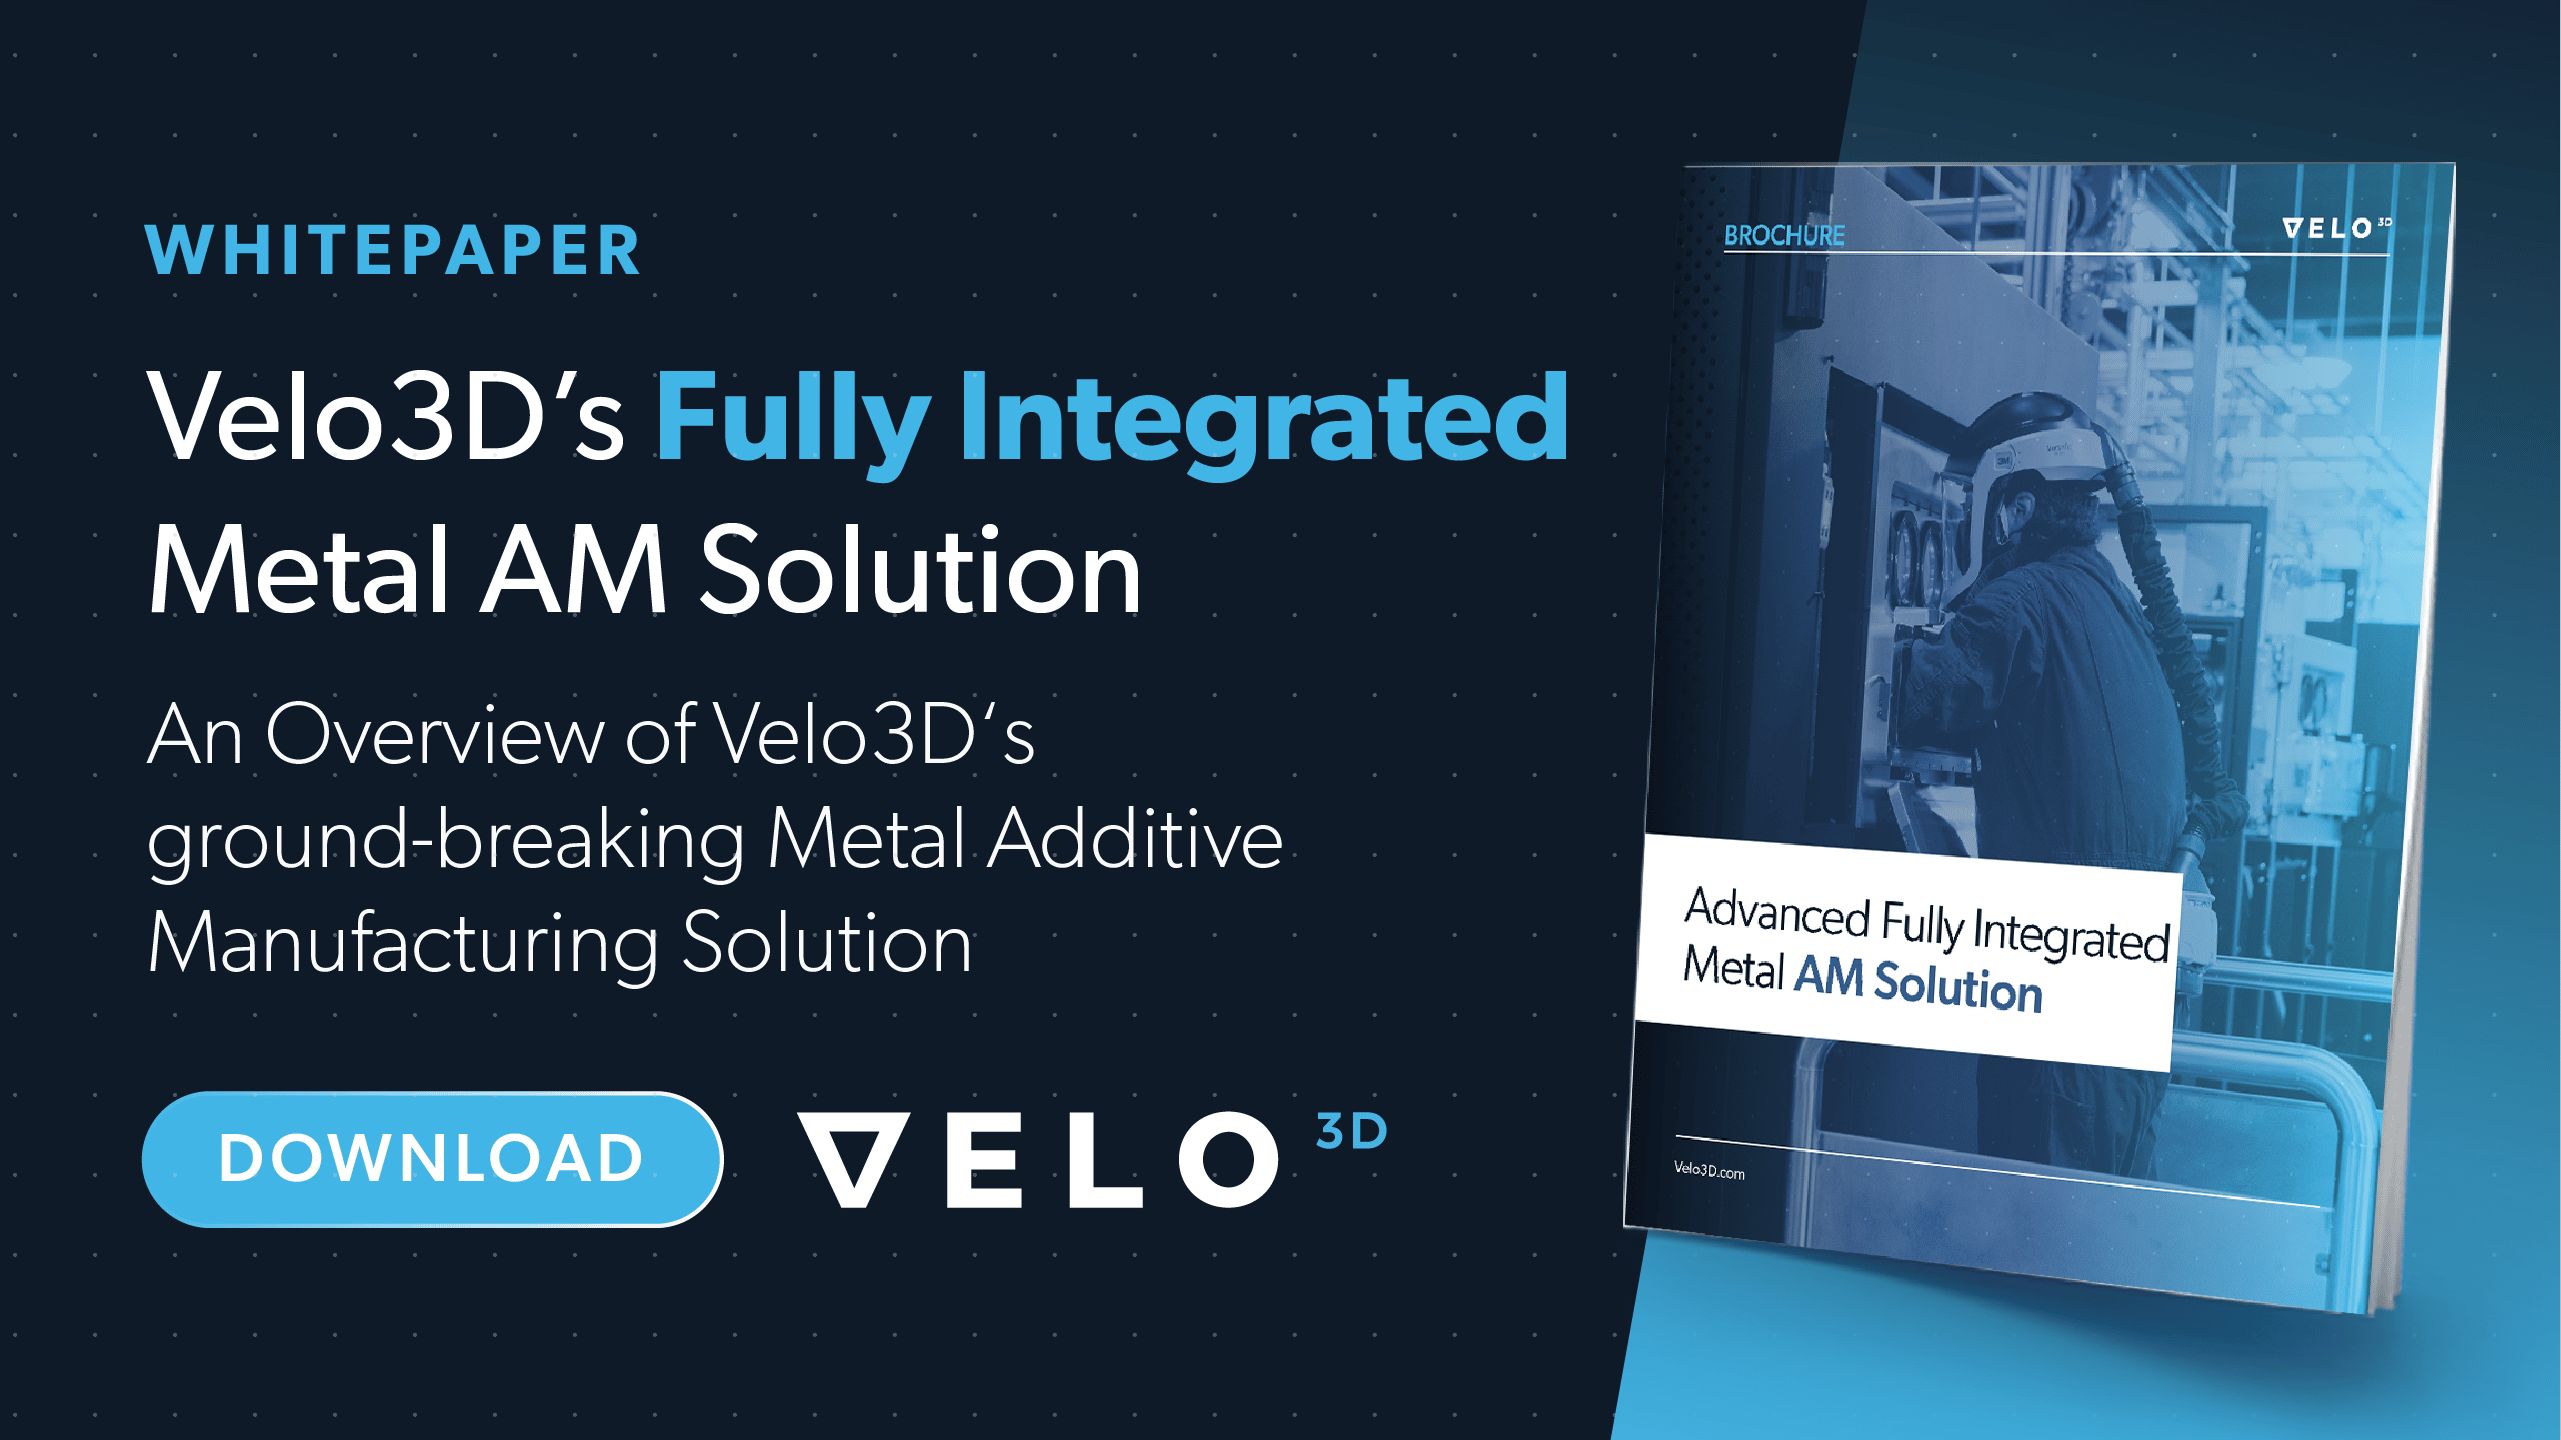 Velo3Ds Advanced Fully Integrated Metal AM Solution